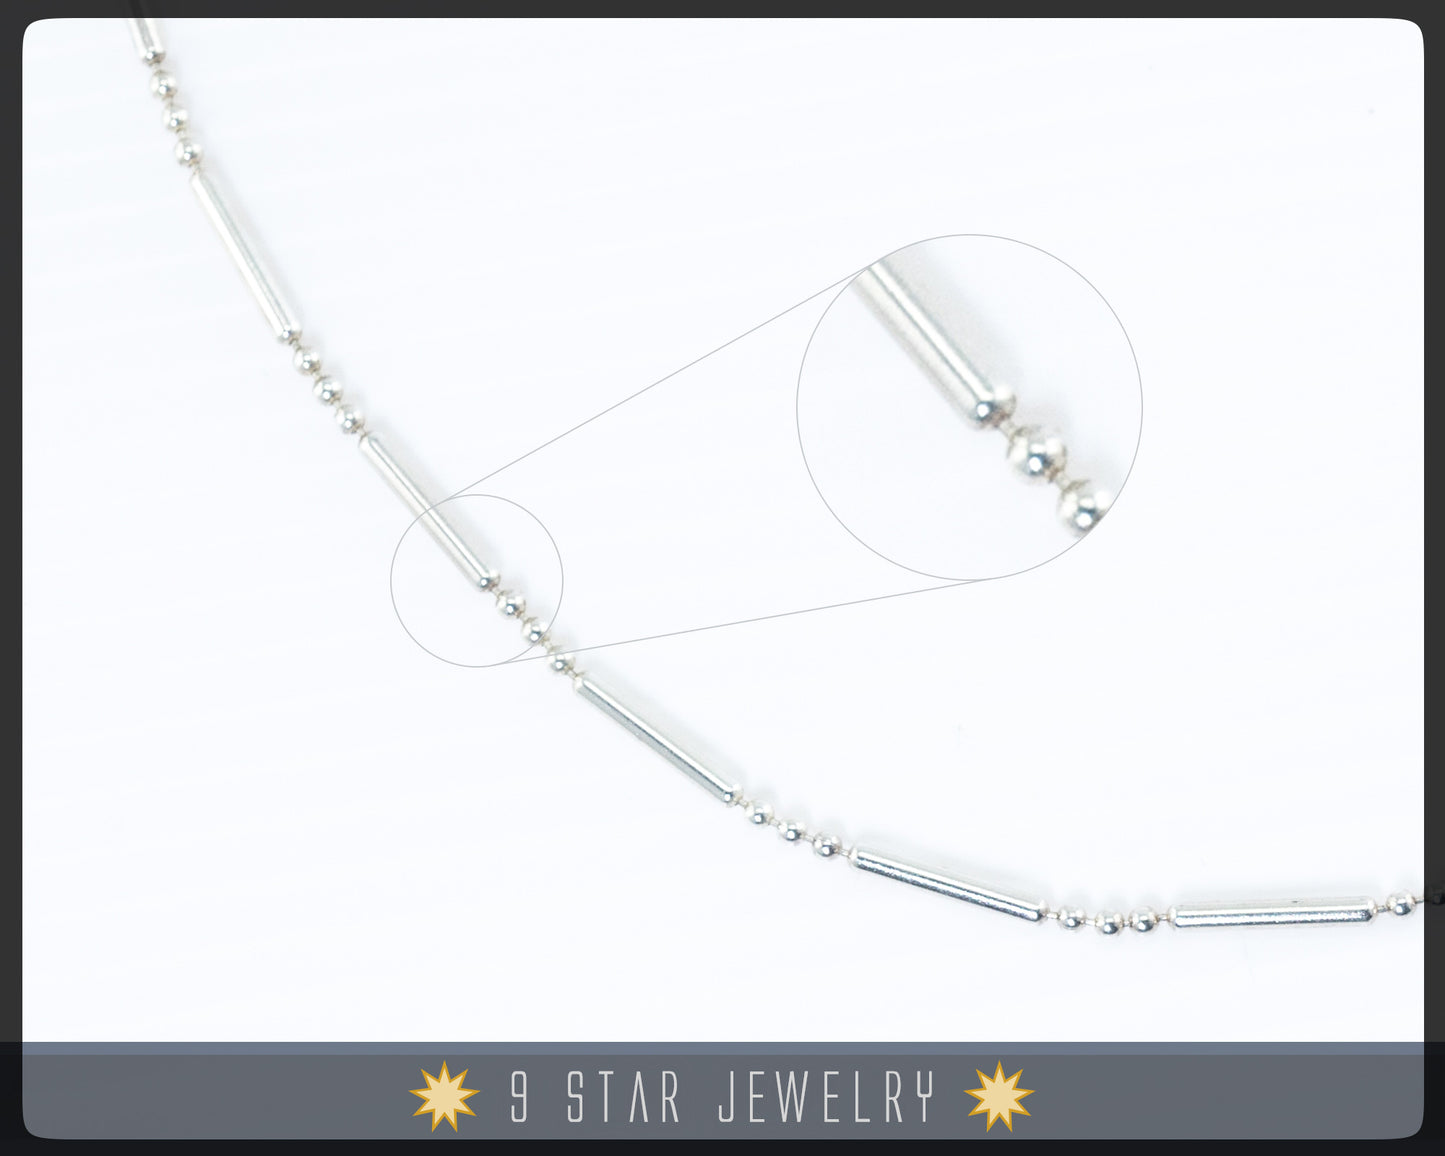 Sterling Silver 18" Bar and Bead Chain Necklace